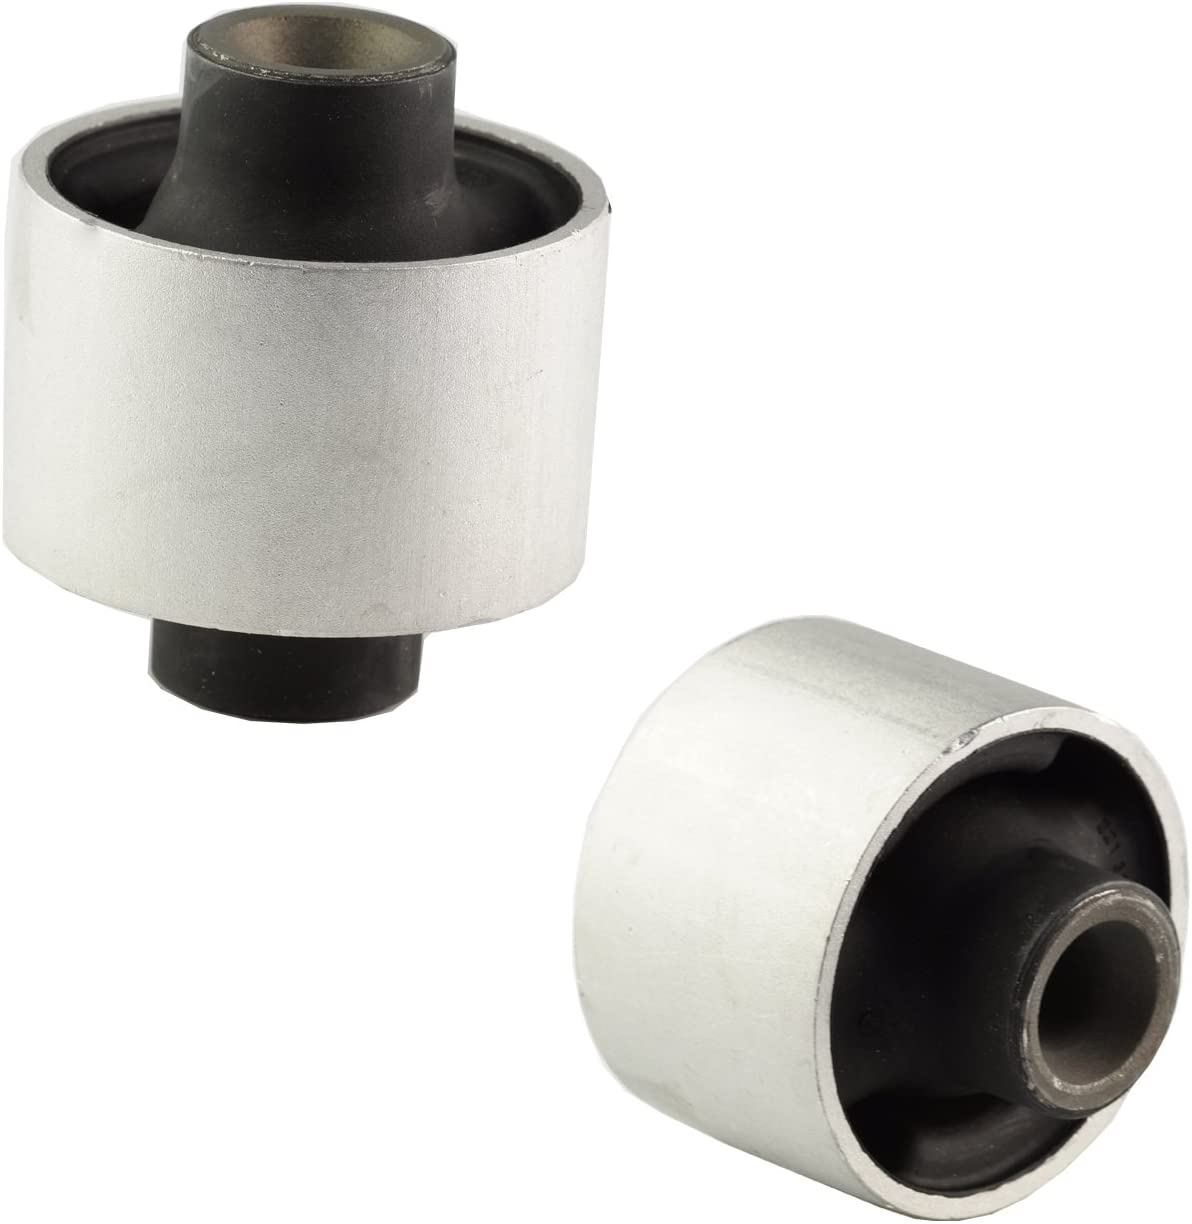 Bapmic 2213330814 Front Lower Forward Control Arm Bushing for Mercedes W221 W216 (Pack of 2) (2 Pcs)